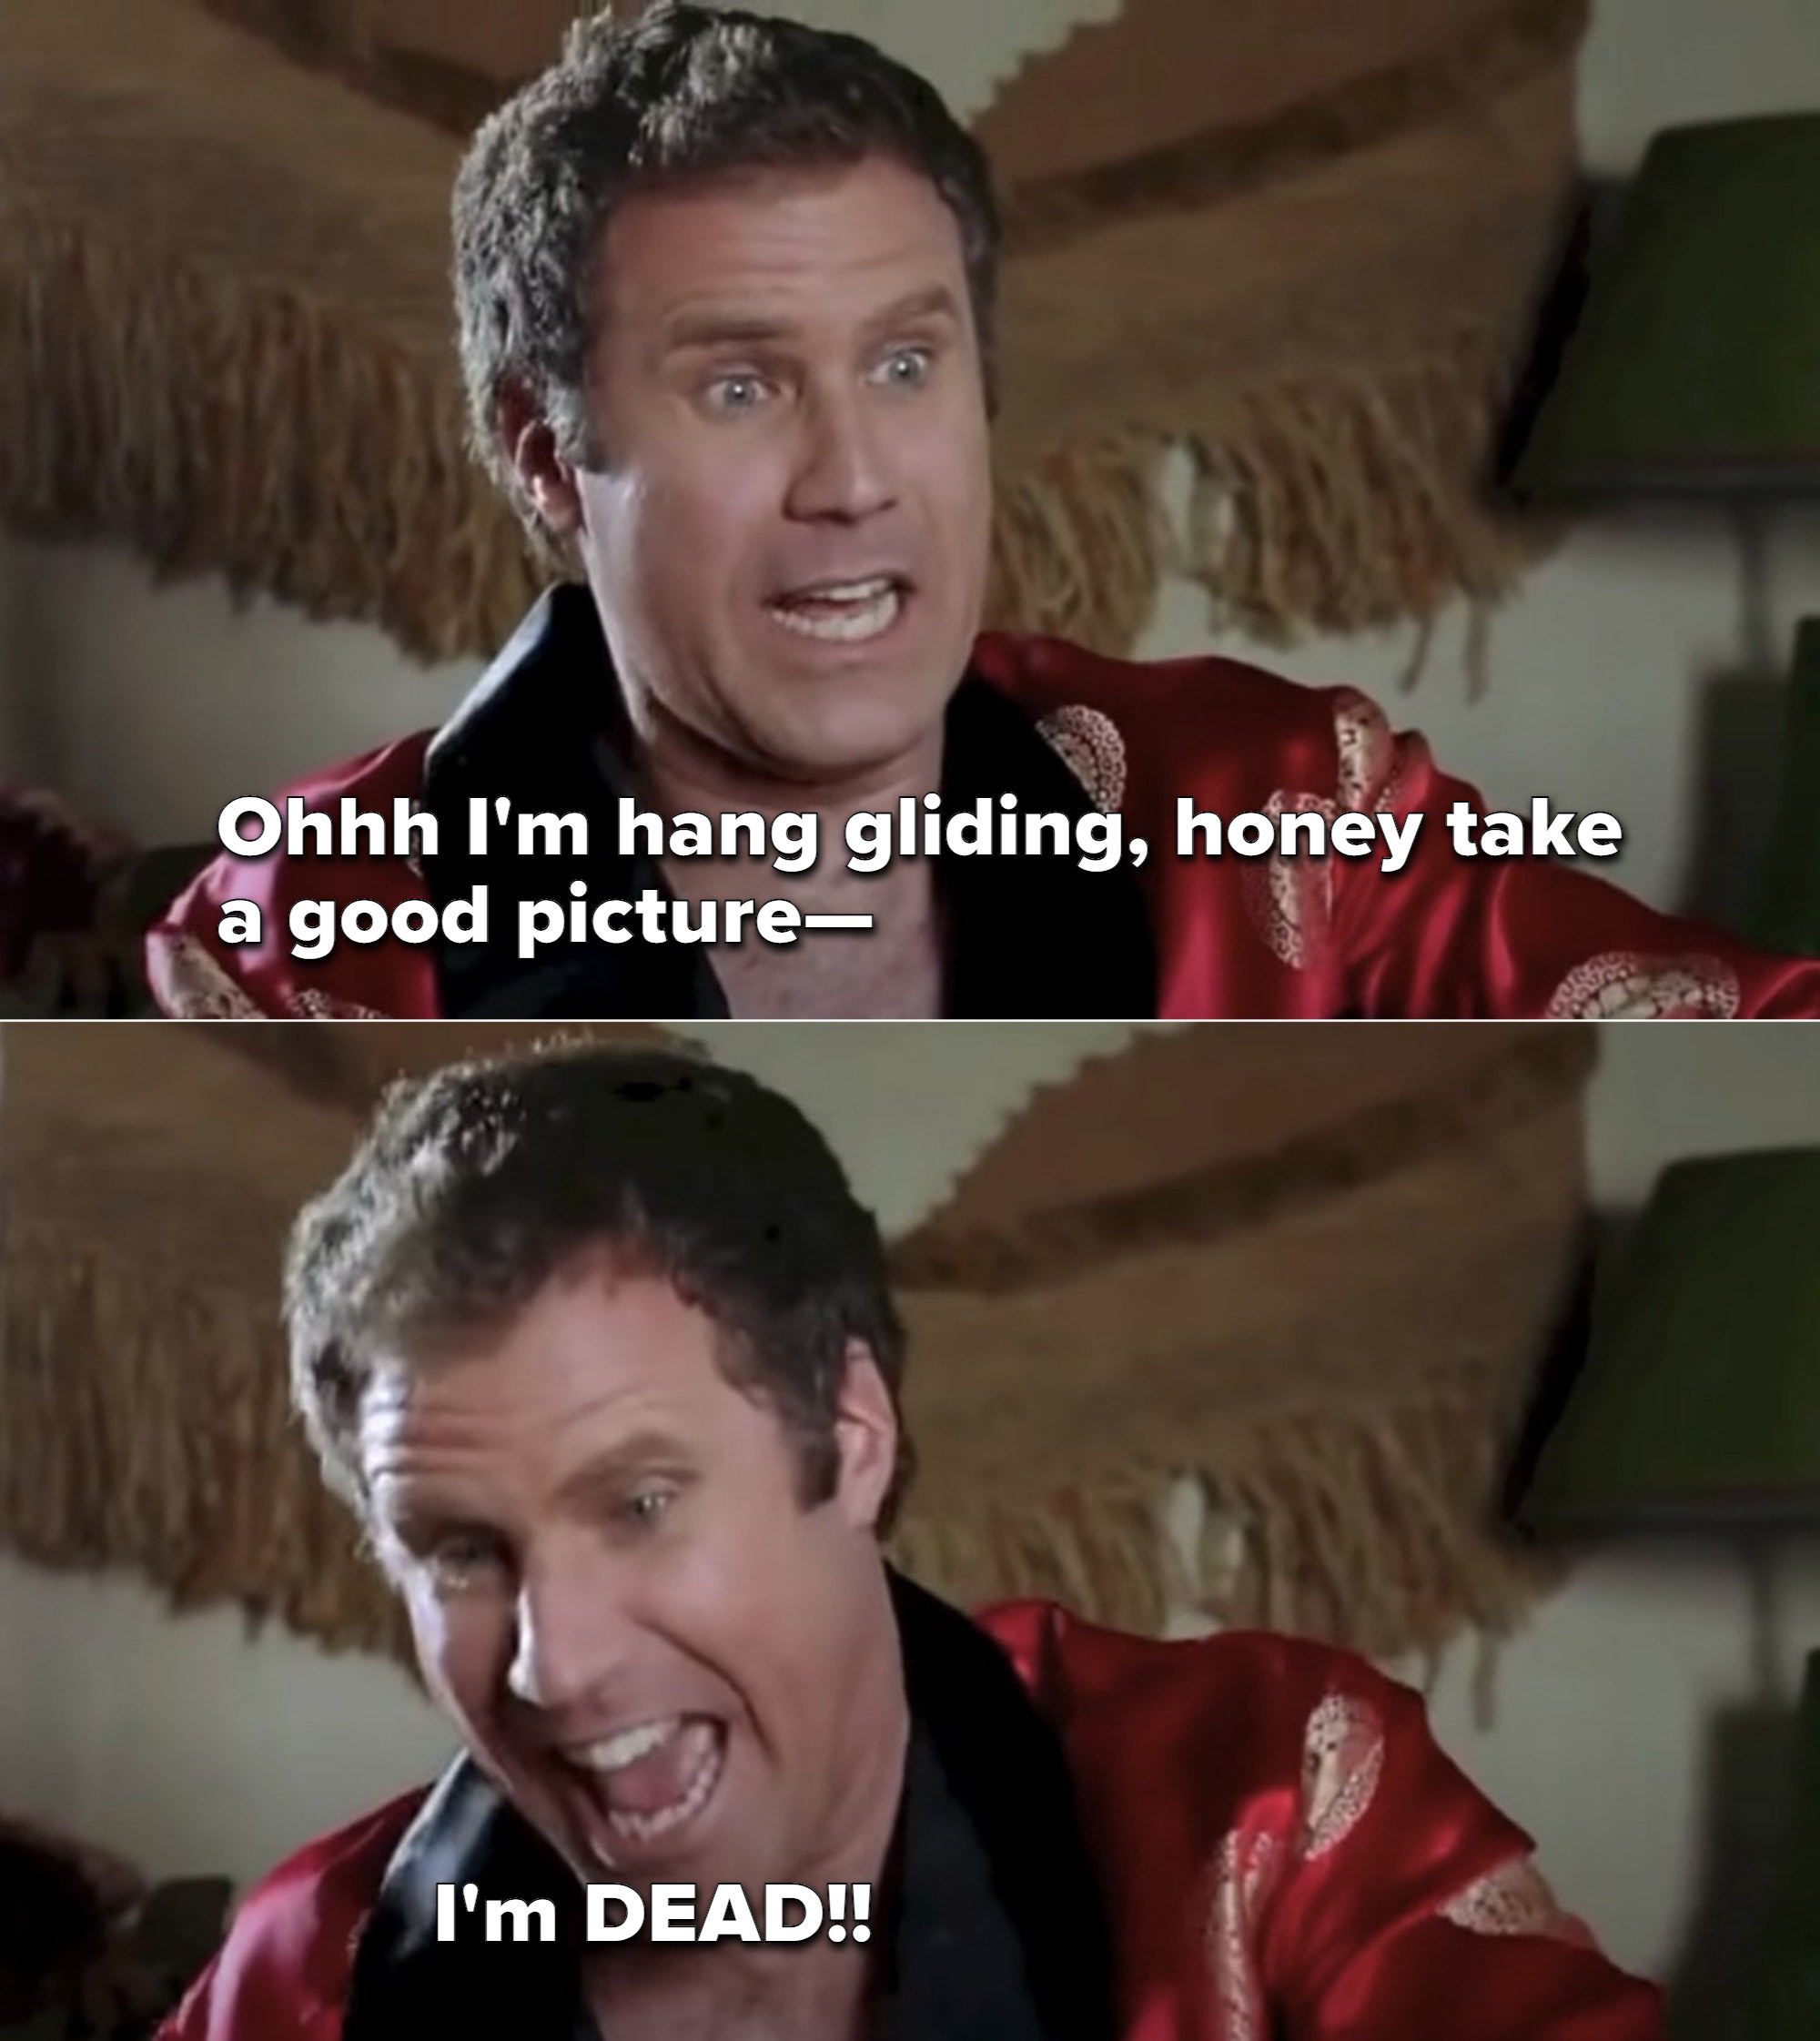 Will Ferrell says &quot;Ohhh, I&#x27;m hang gliding, honey, take a good picture—&quot; and then &quot;I&#x27;m dead!&quot;